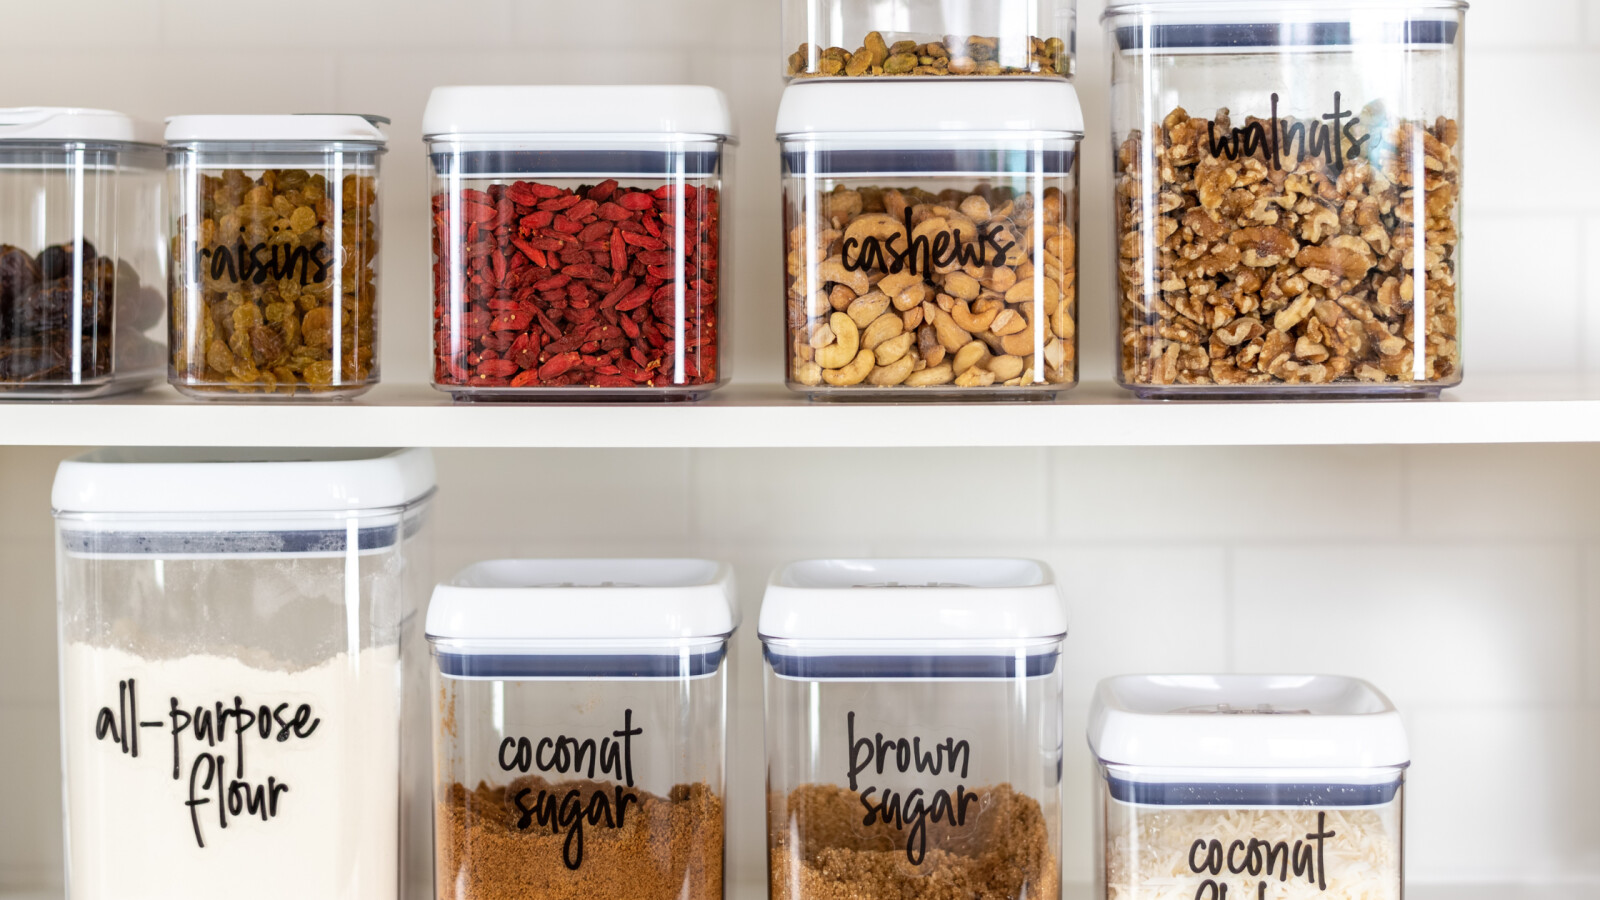 Top 5 Home Organizing Hacks from a Professional Organizer